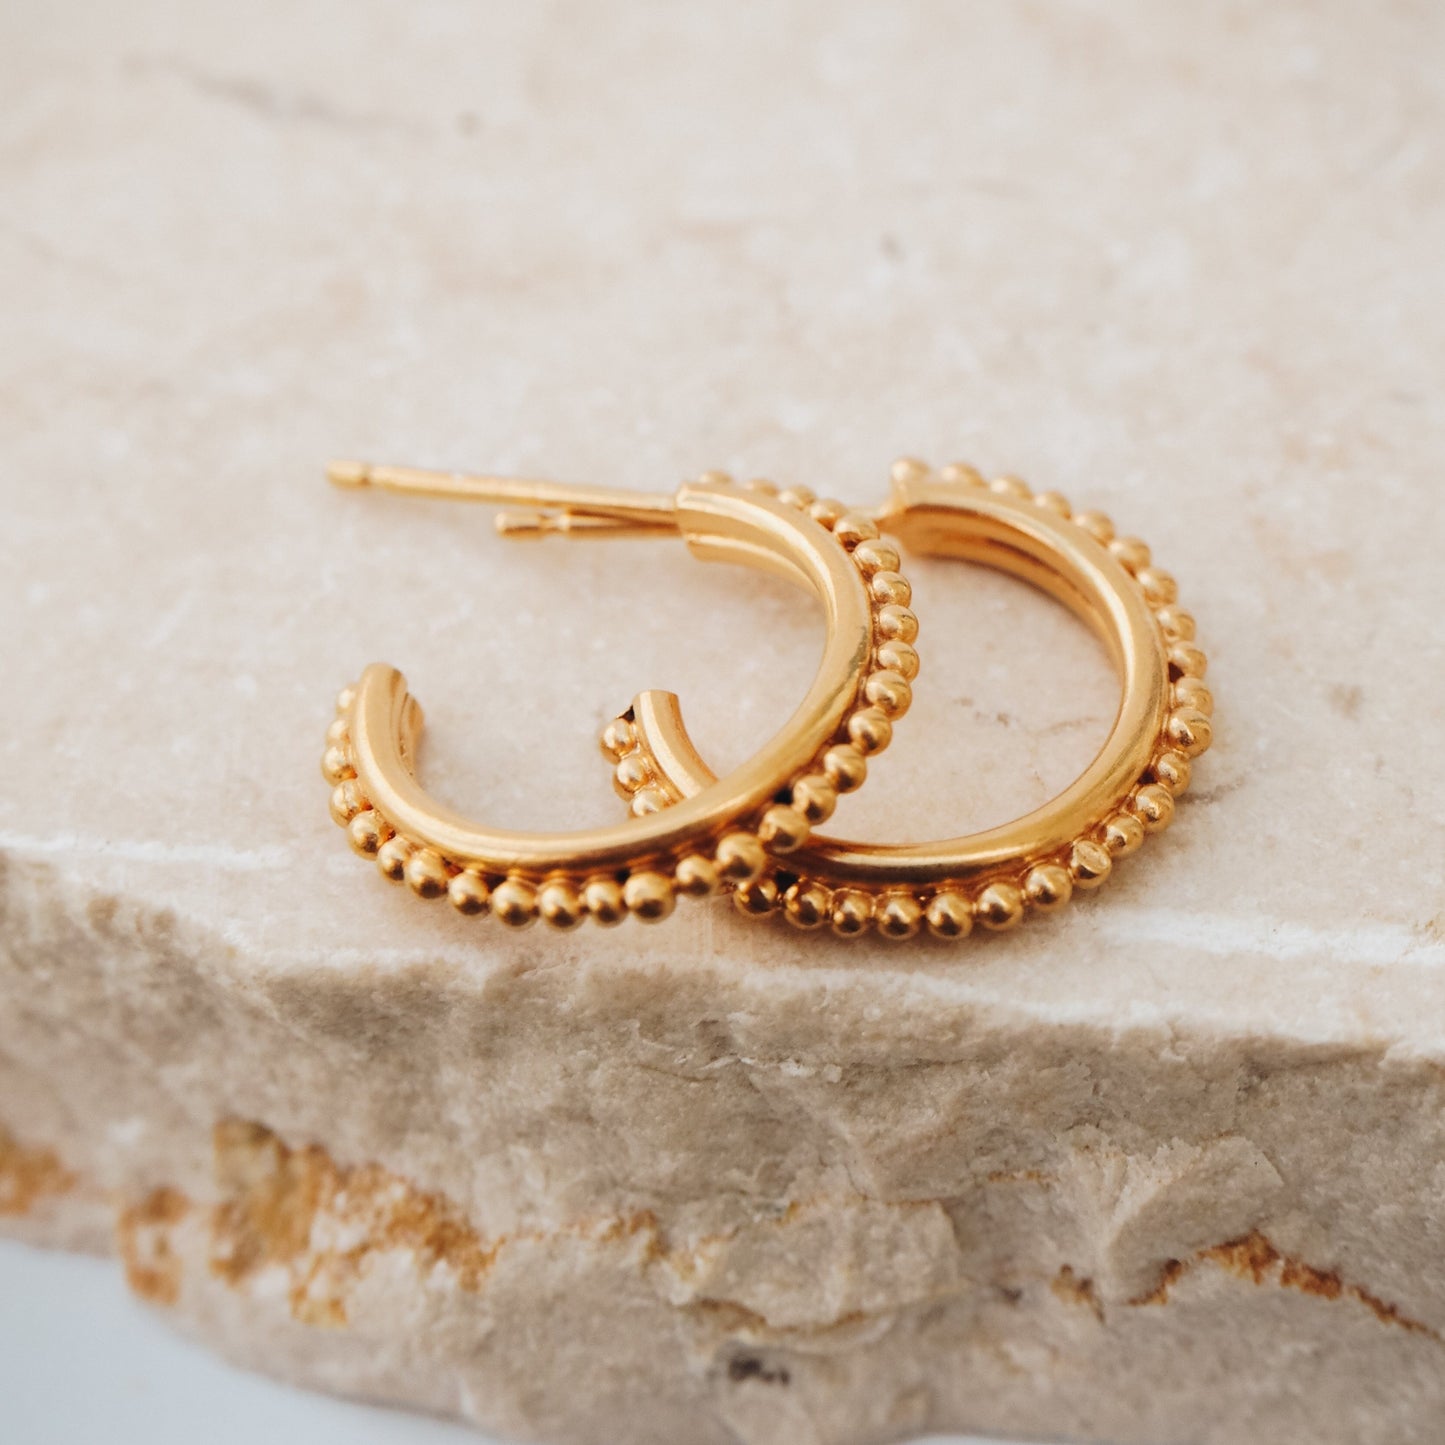 Pair of gold stud hoop earrings with intricate granulation detailing, evoking ancient adornment.